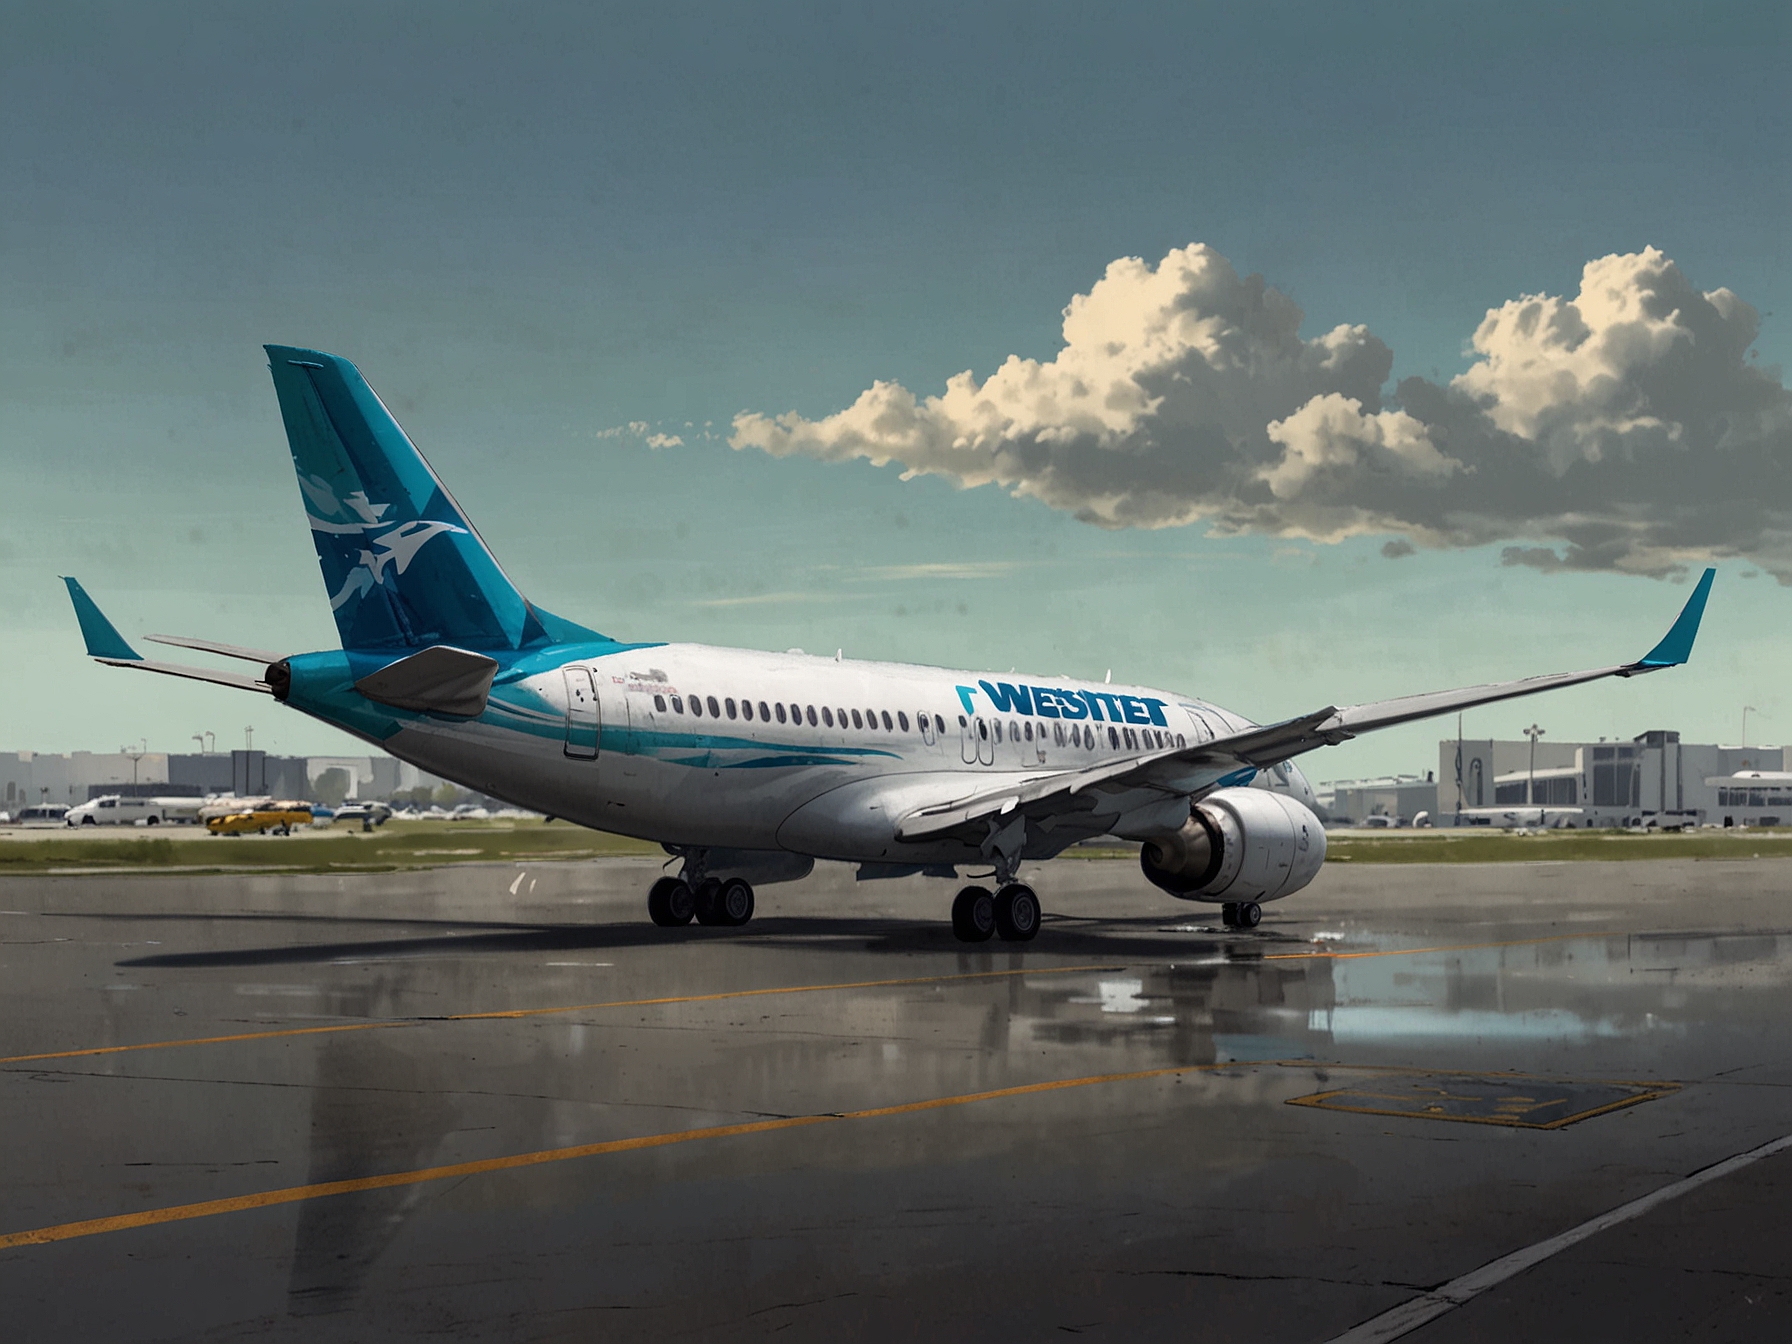 A WestJet airplane parked on the tarmac with no crew or passengers in sight, illustrating the operational halt caused by the pilot strike and highlighting the broad impact on the airline's services.